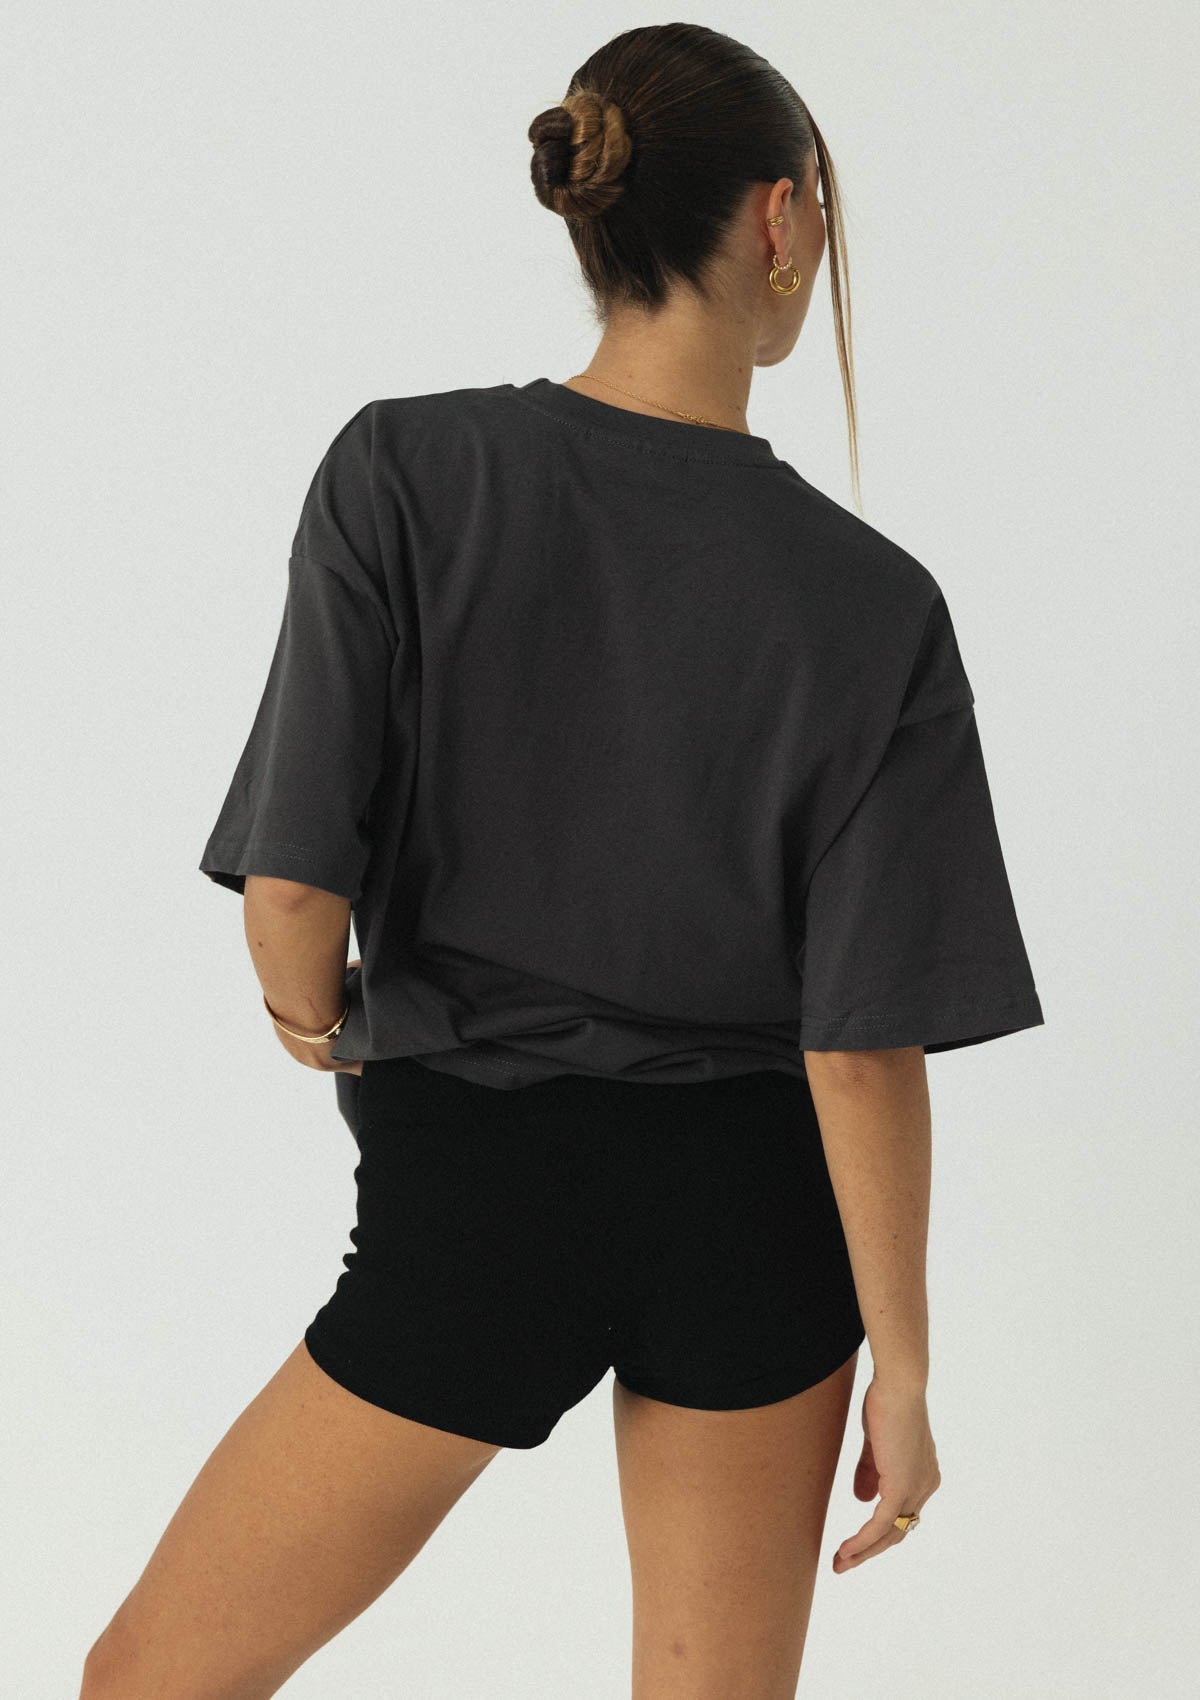 The Athletic Oversized Tee - Charcoal